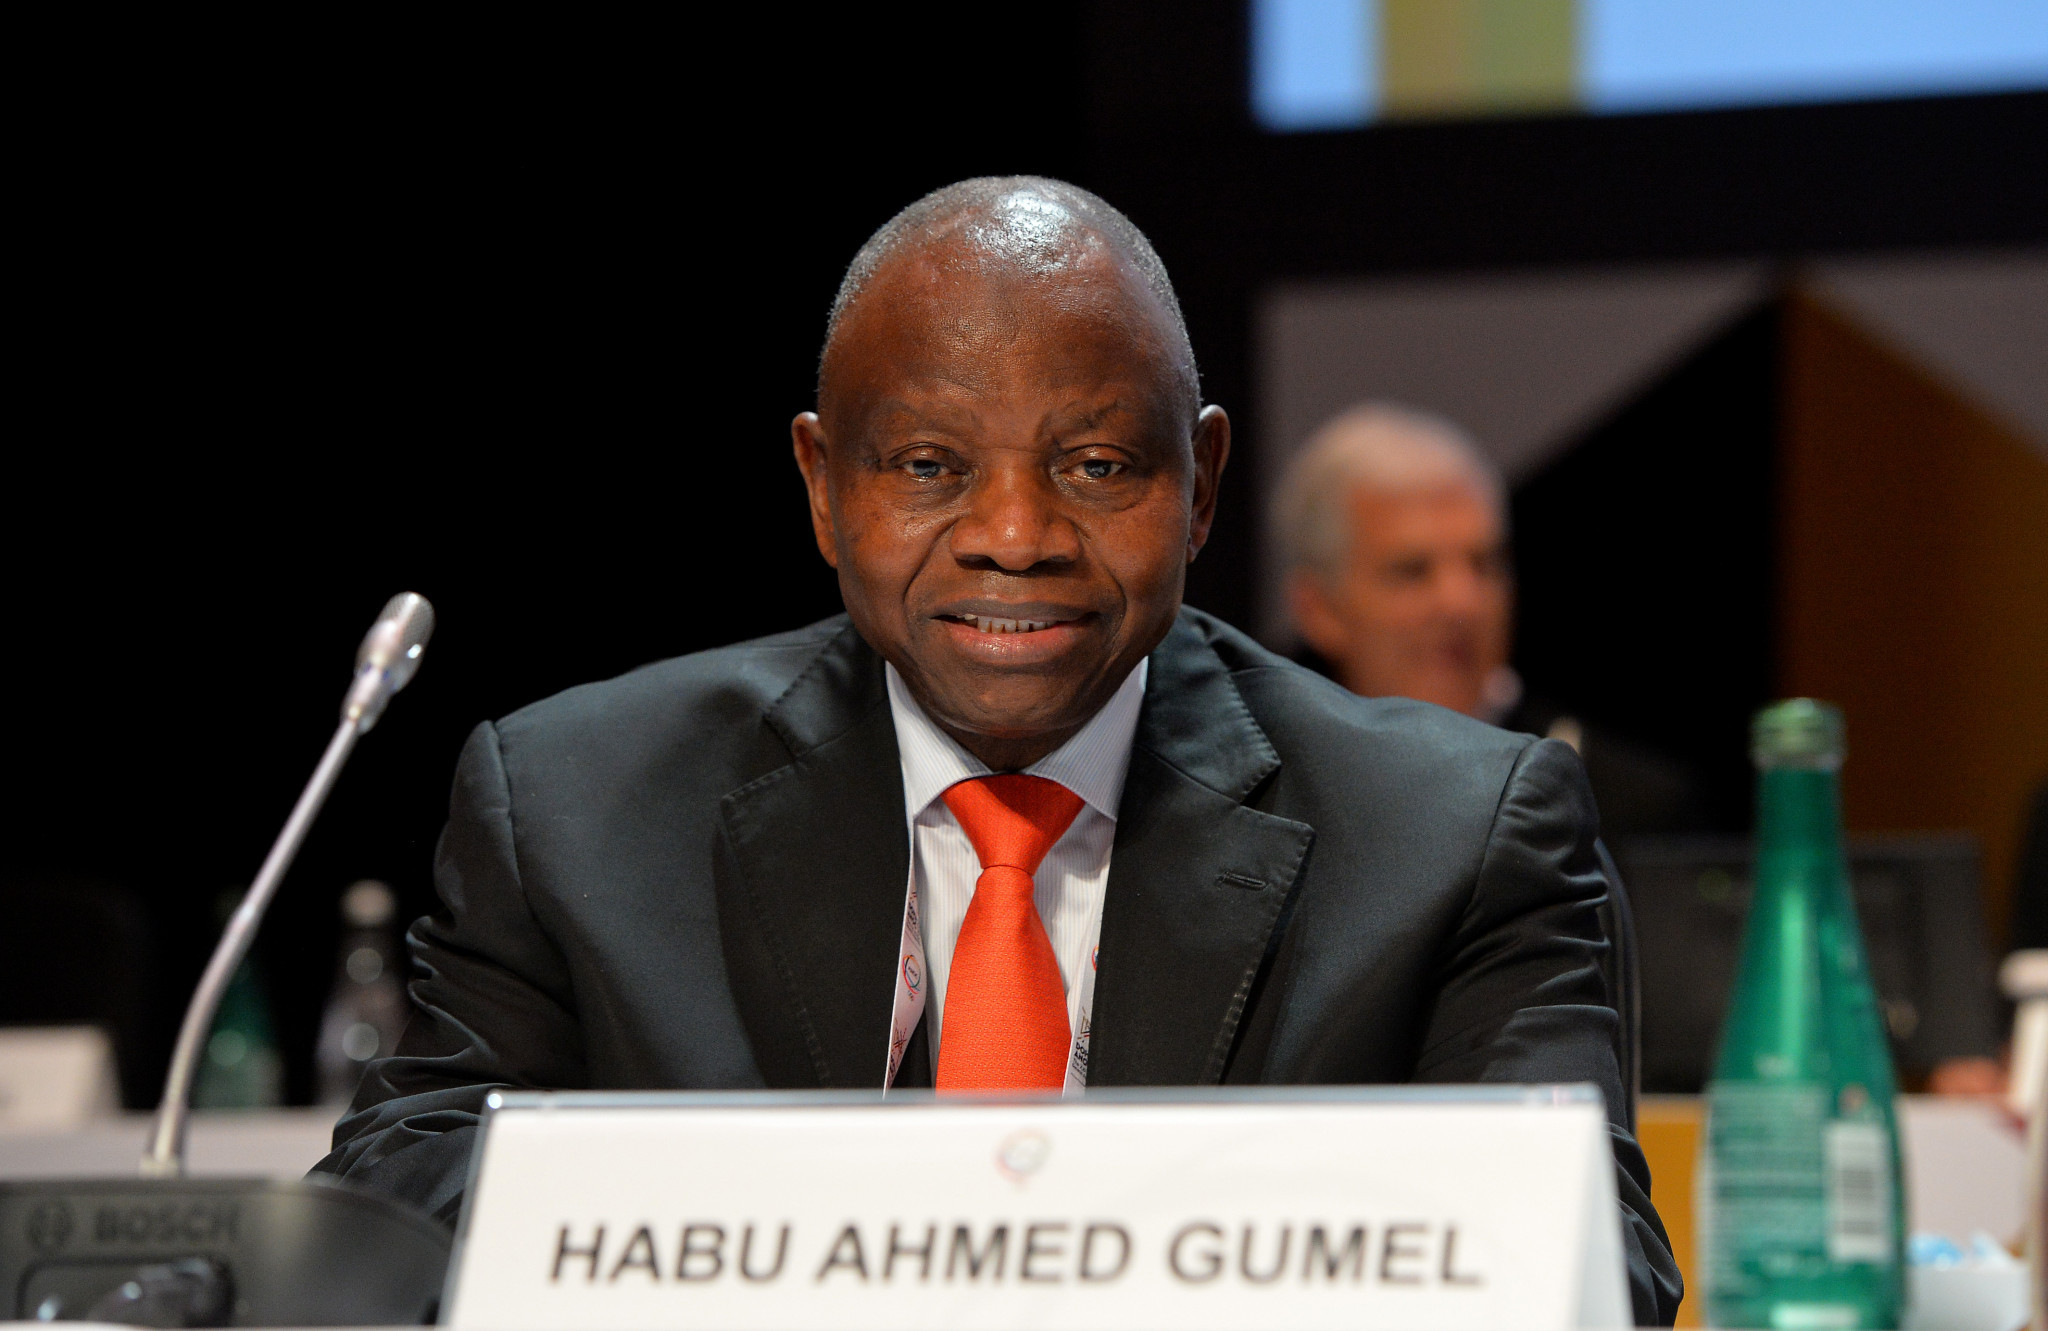 Habu Ahmed Gumel has been re-elected unopposed as President of the Nigerian Olympic Committee ©Getty Images